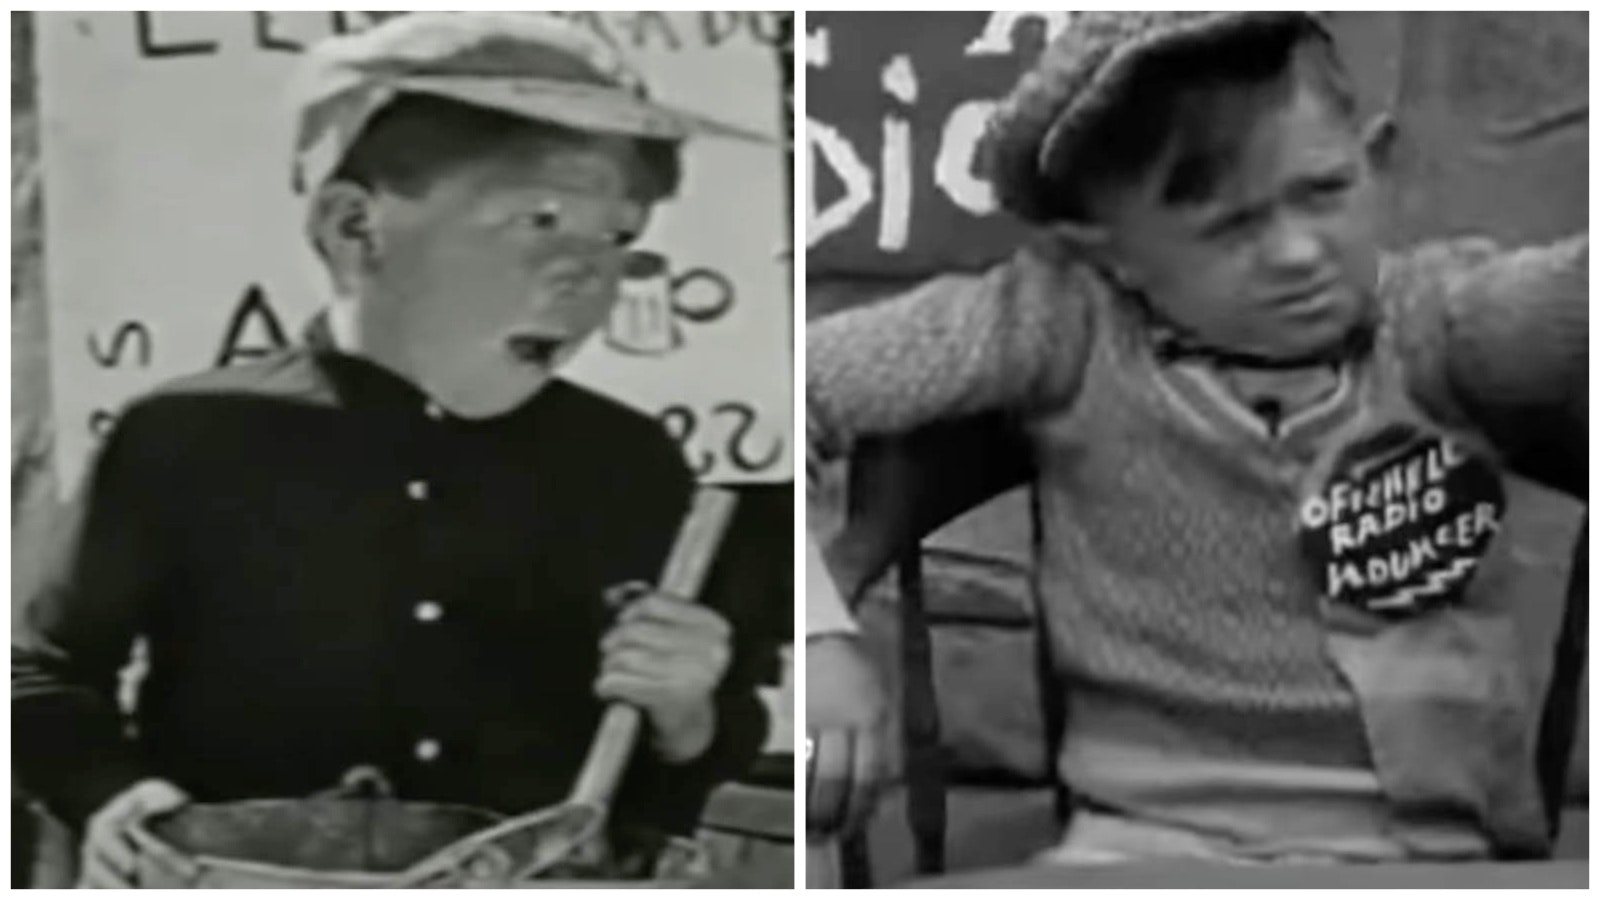 Two members of the extensive "Our Gang" family of children featured in short comedy films in the 1920s and 1930s were born in Wyoming. "Mickey" Daniels, left, was born in Rock Springs and "Bobby" Mallon was born in Greybull.